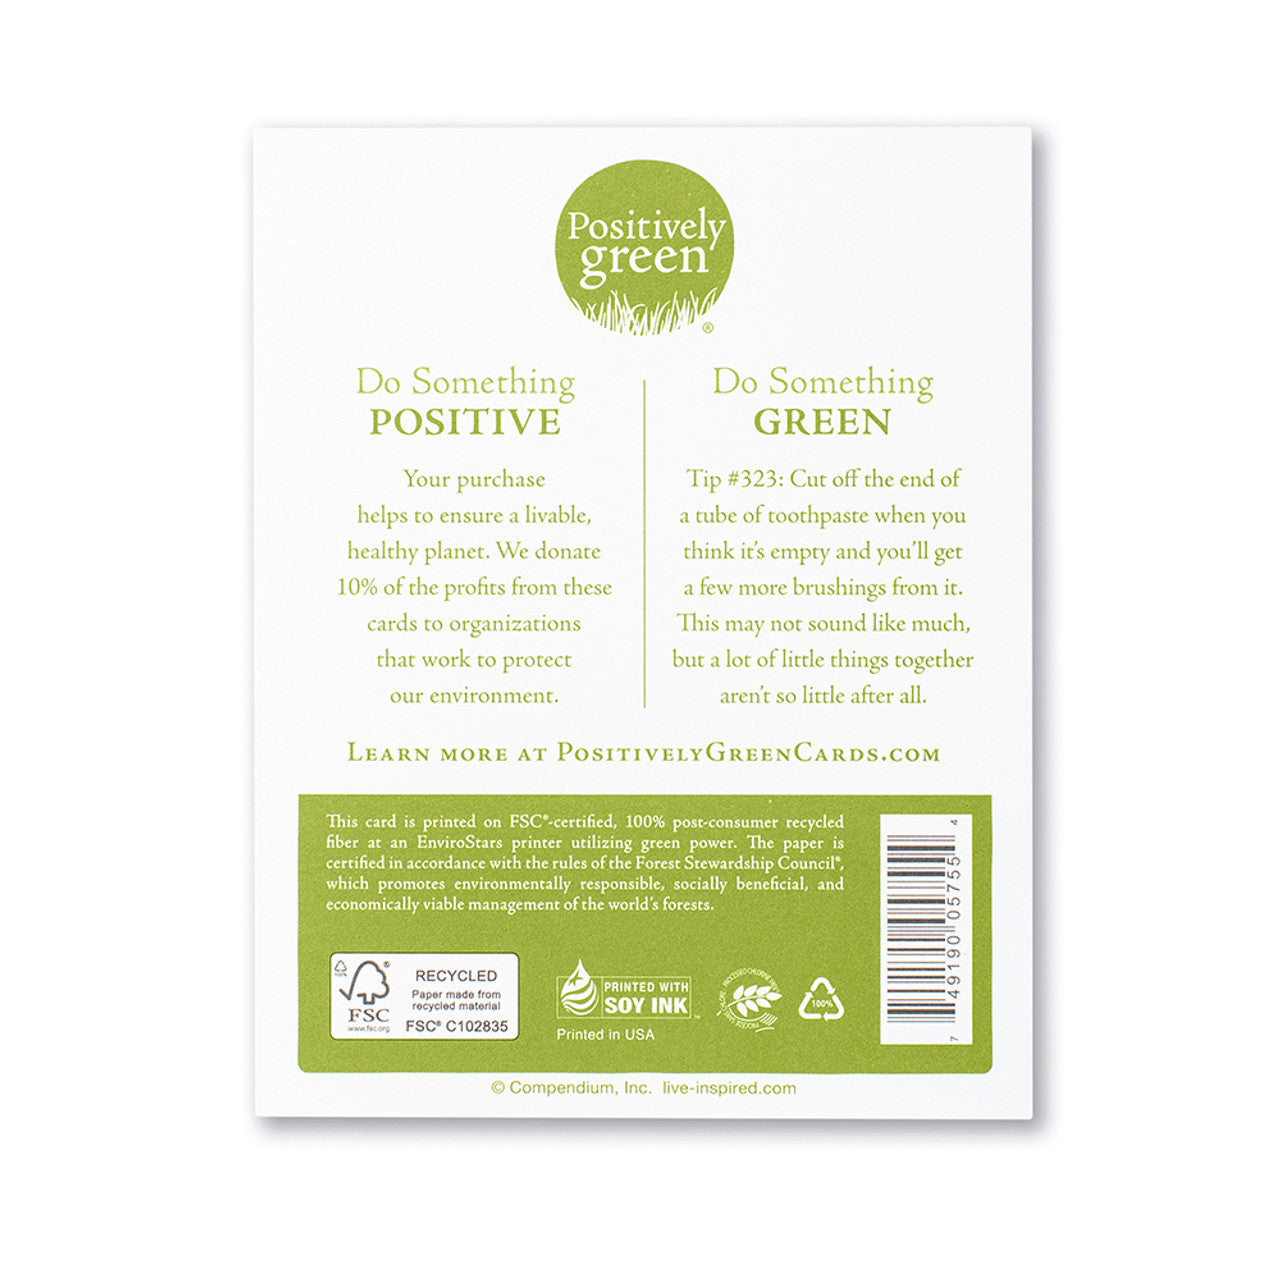 Positively Green Appreciation Greeting Card - “When it comes to giving, some people stop at nothing.” —Unknown - Mellow Monkey